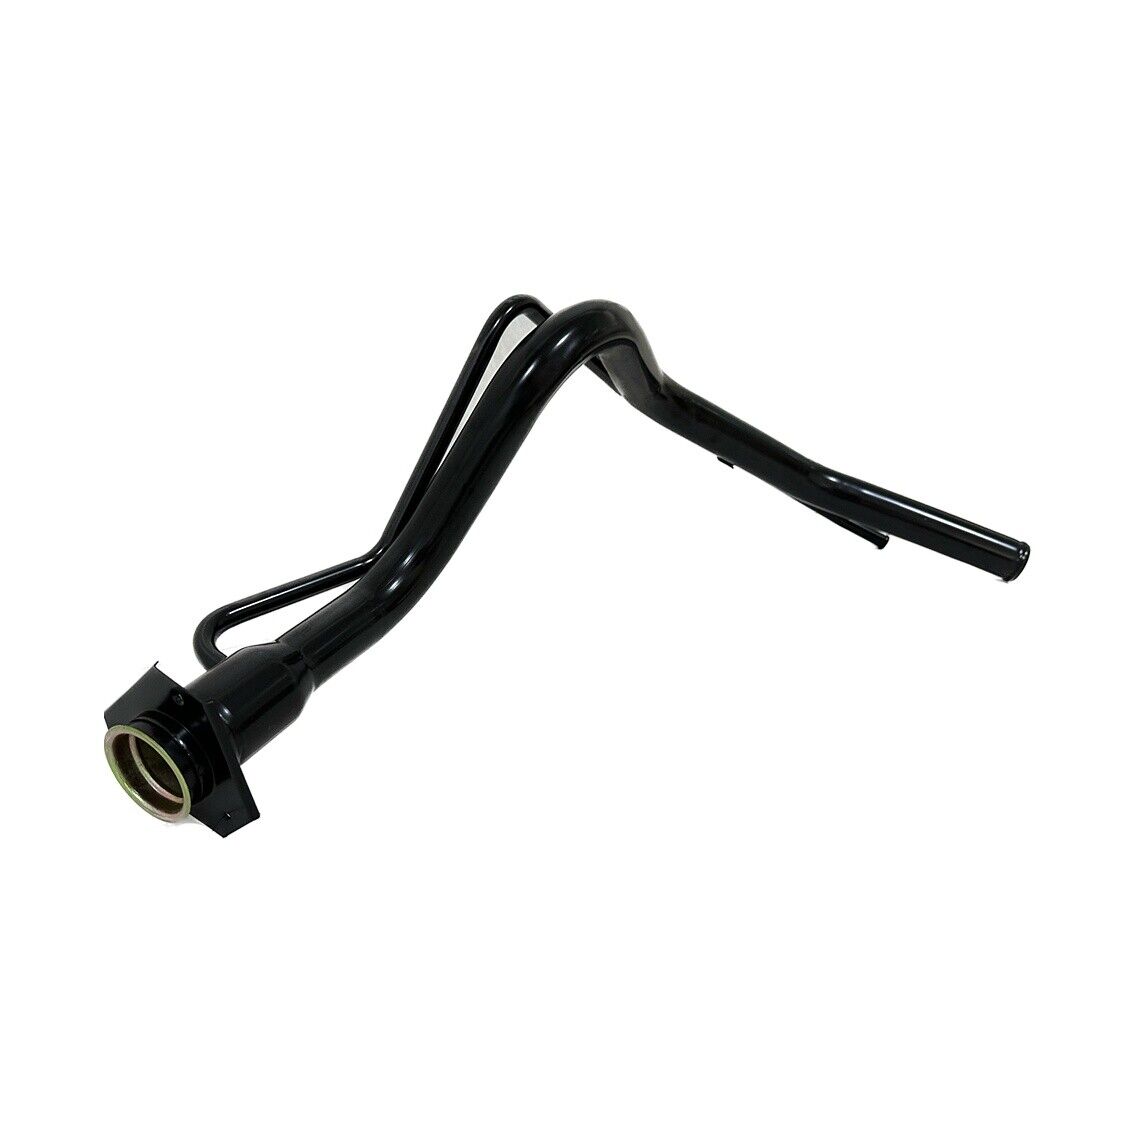 30in Length Fuel Tank Filler Neck Pipe For 1995 1996 Chevy Lumina 3.1L